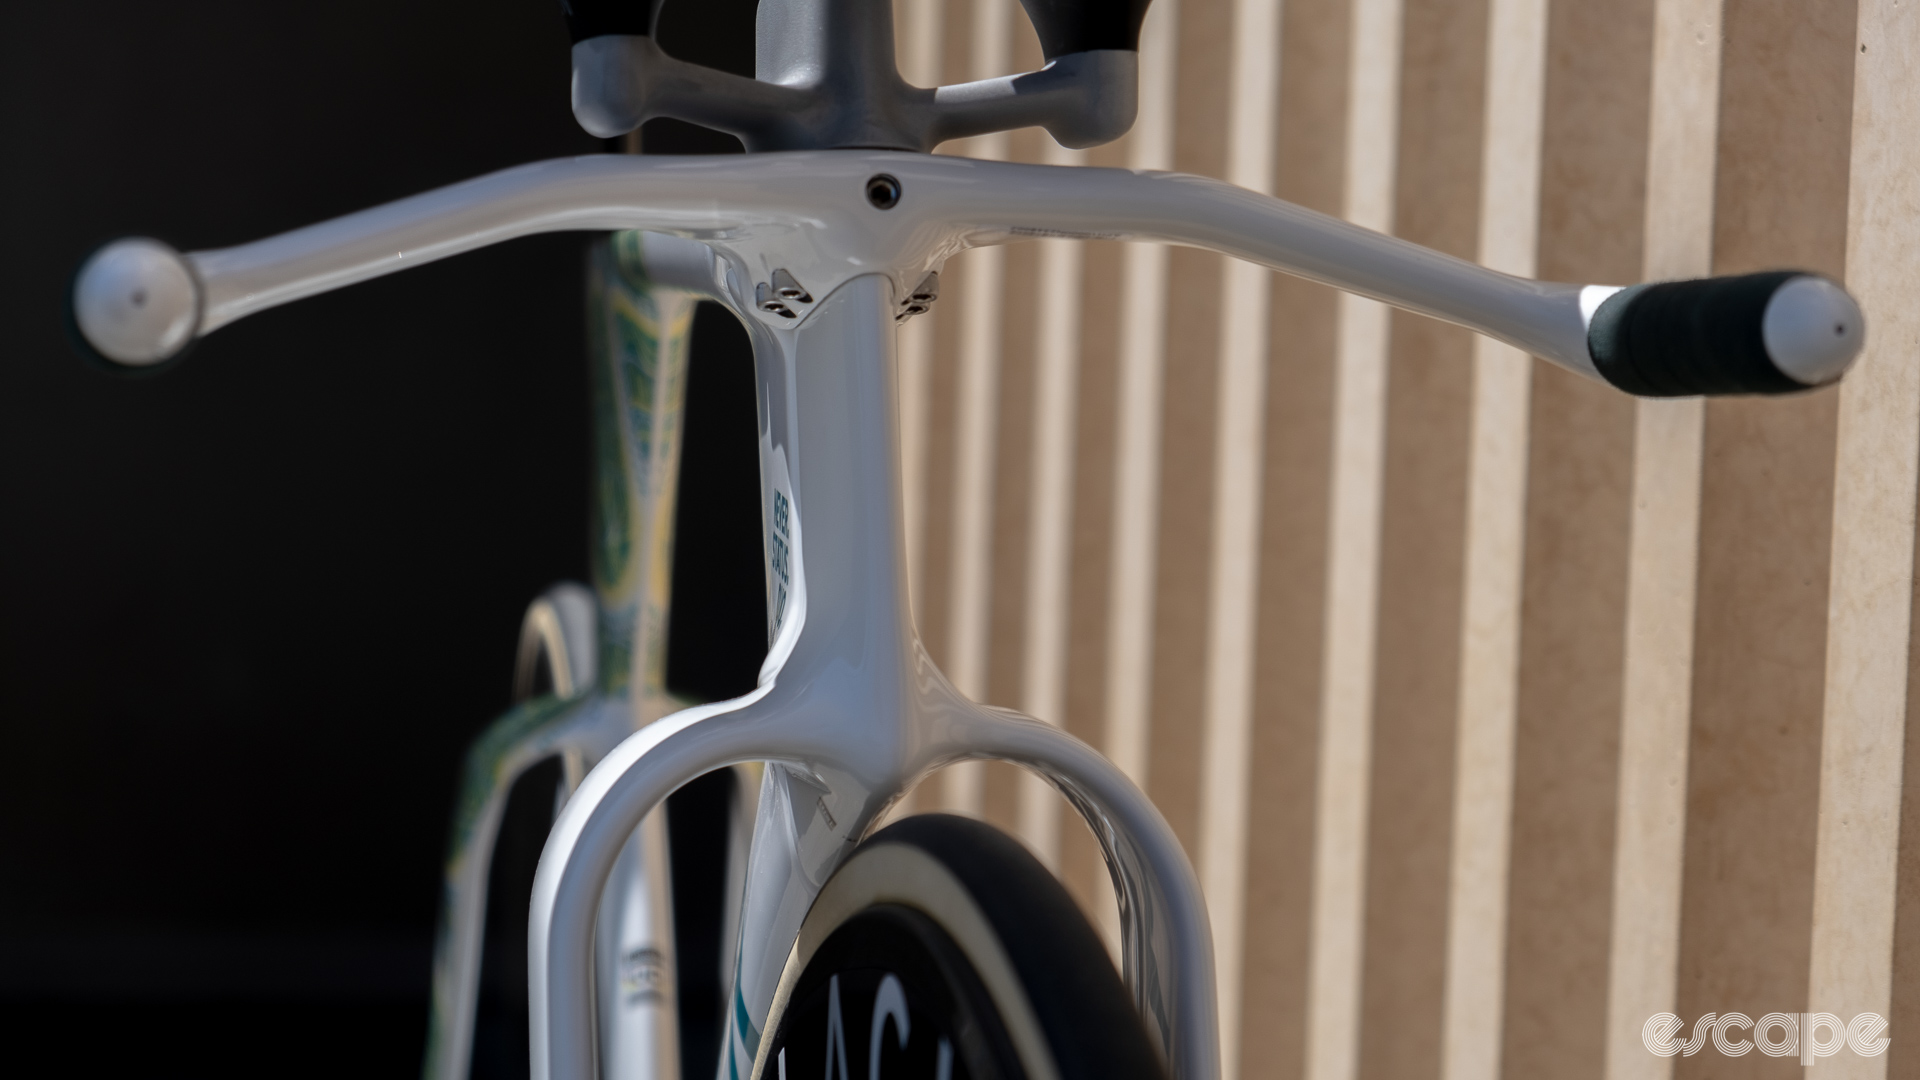 The photo shows the head tube on AusCycling's Factor Hanzo Track pursuit bike.